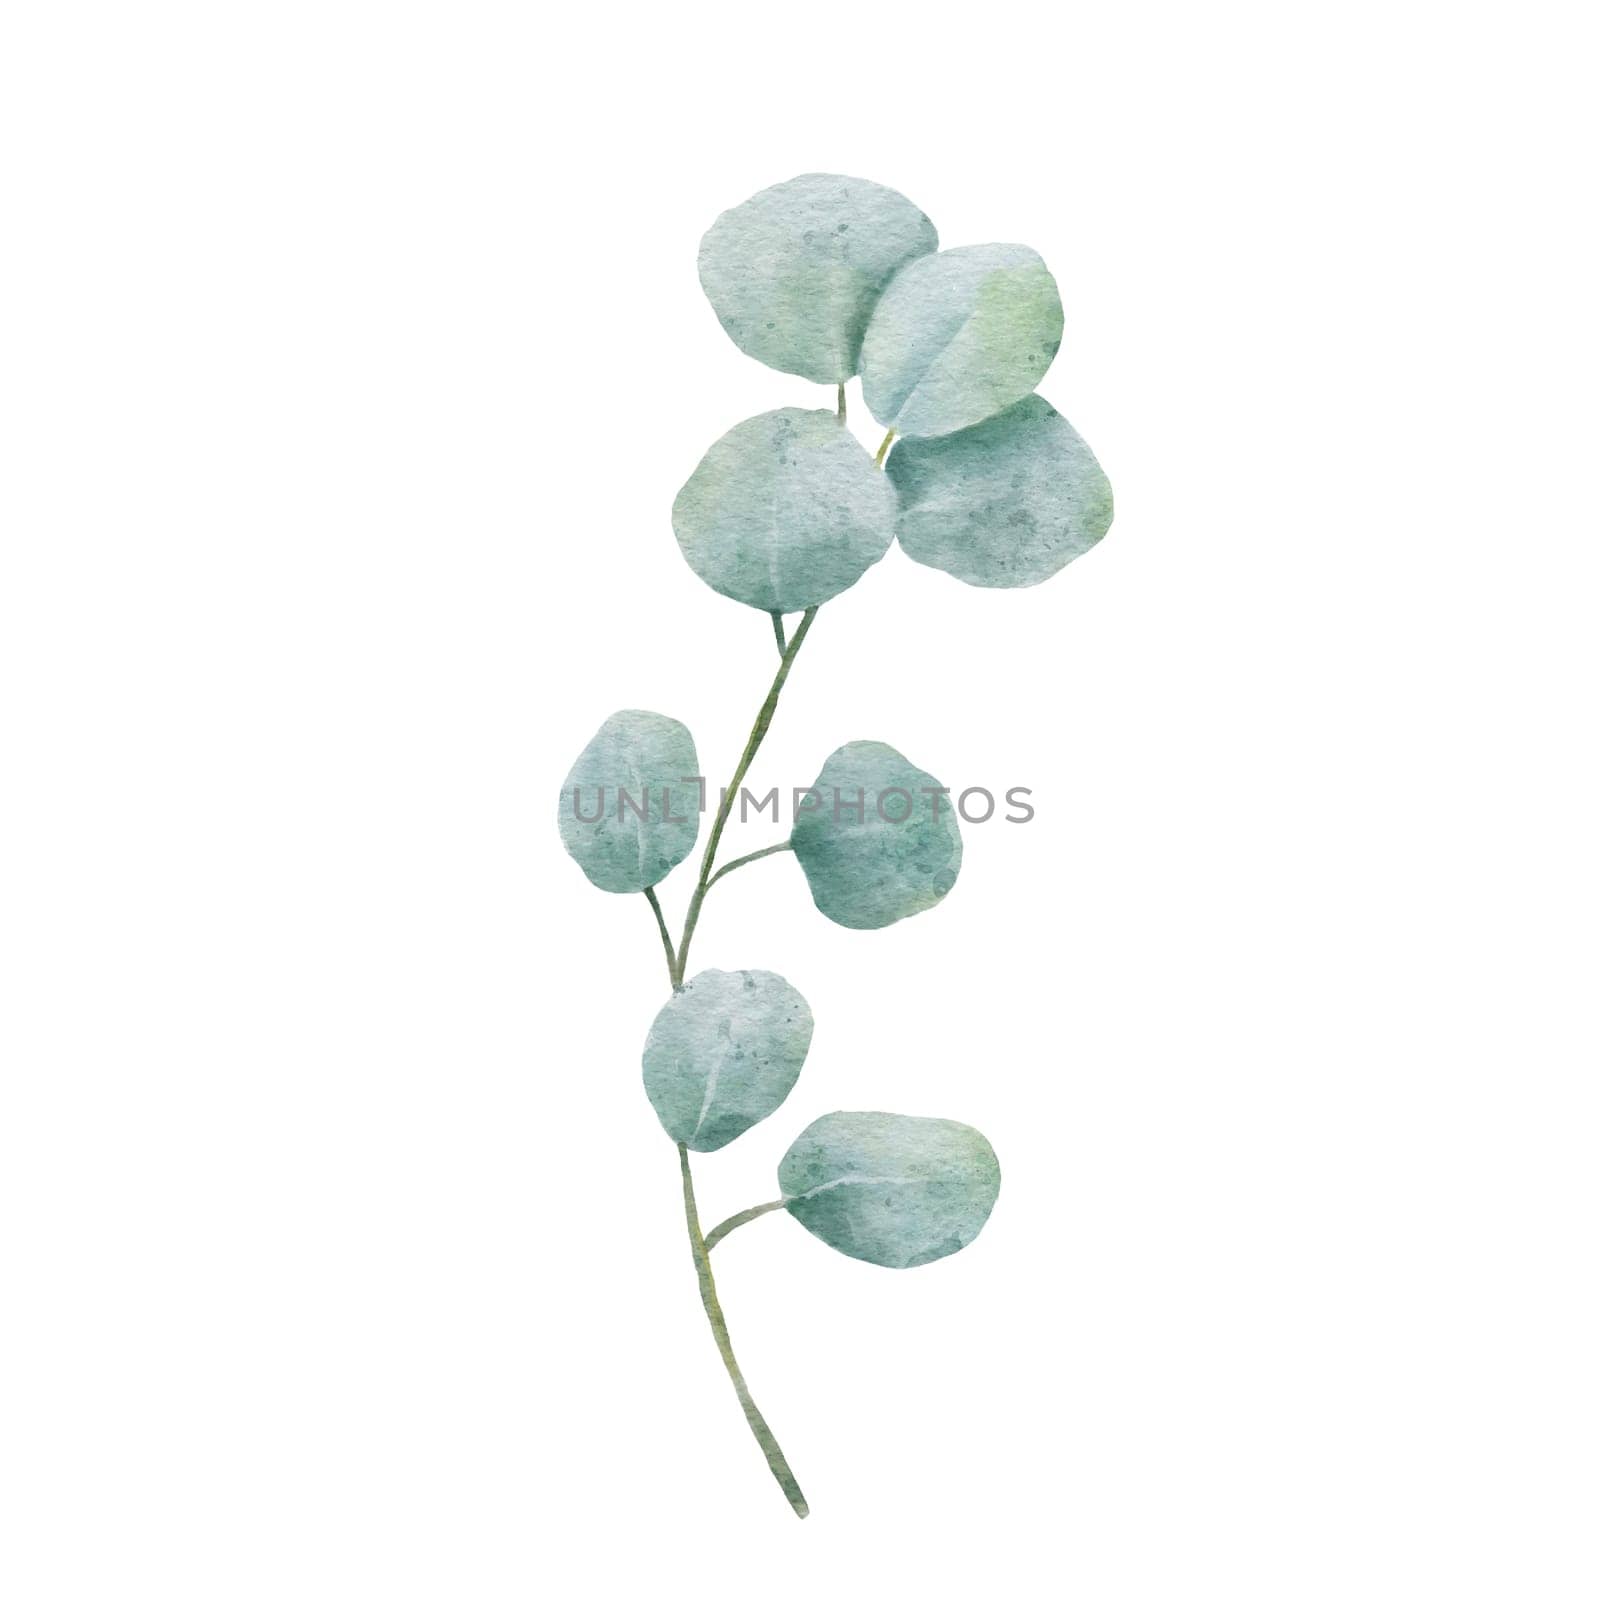 Watercolor Eucaliptus branch drawing. Hand drawn illustration eucalyptus leaves isolated on white background. by ElenaPlatova